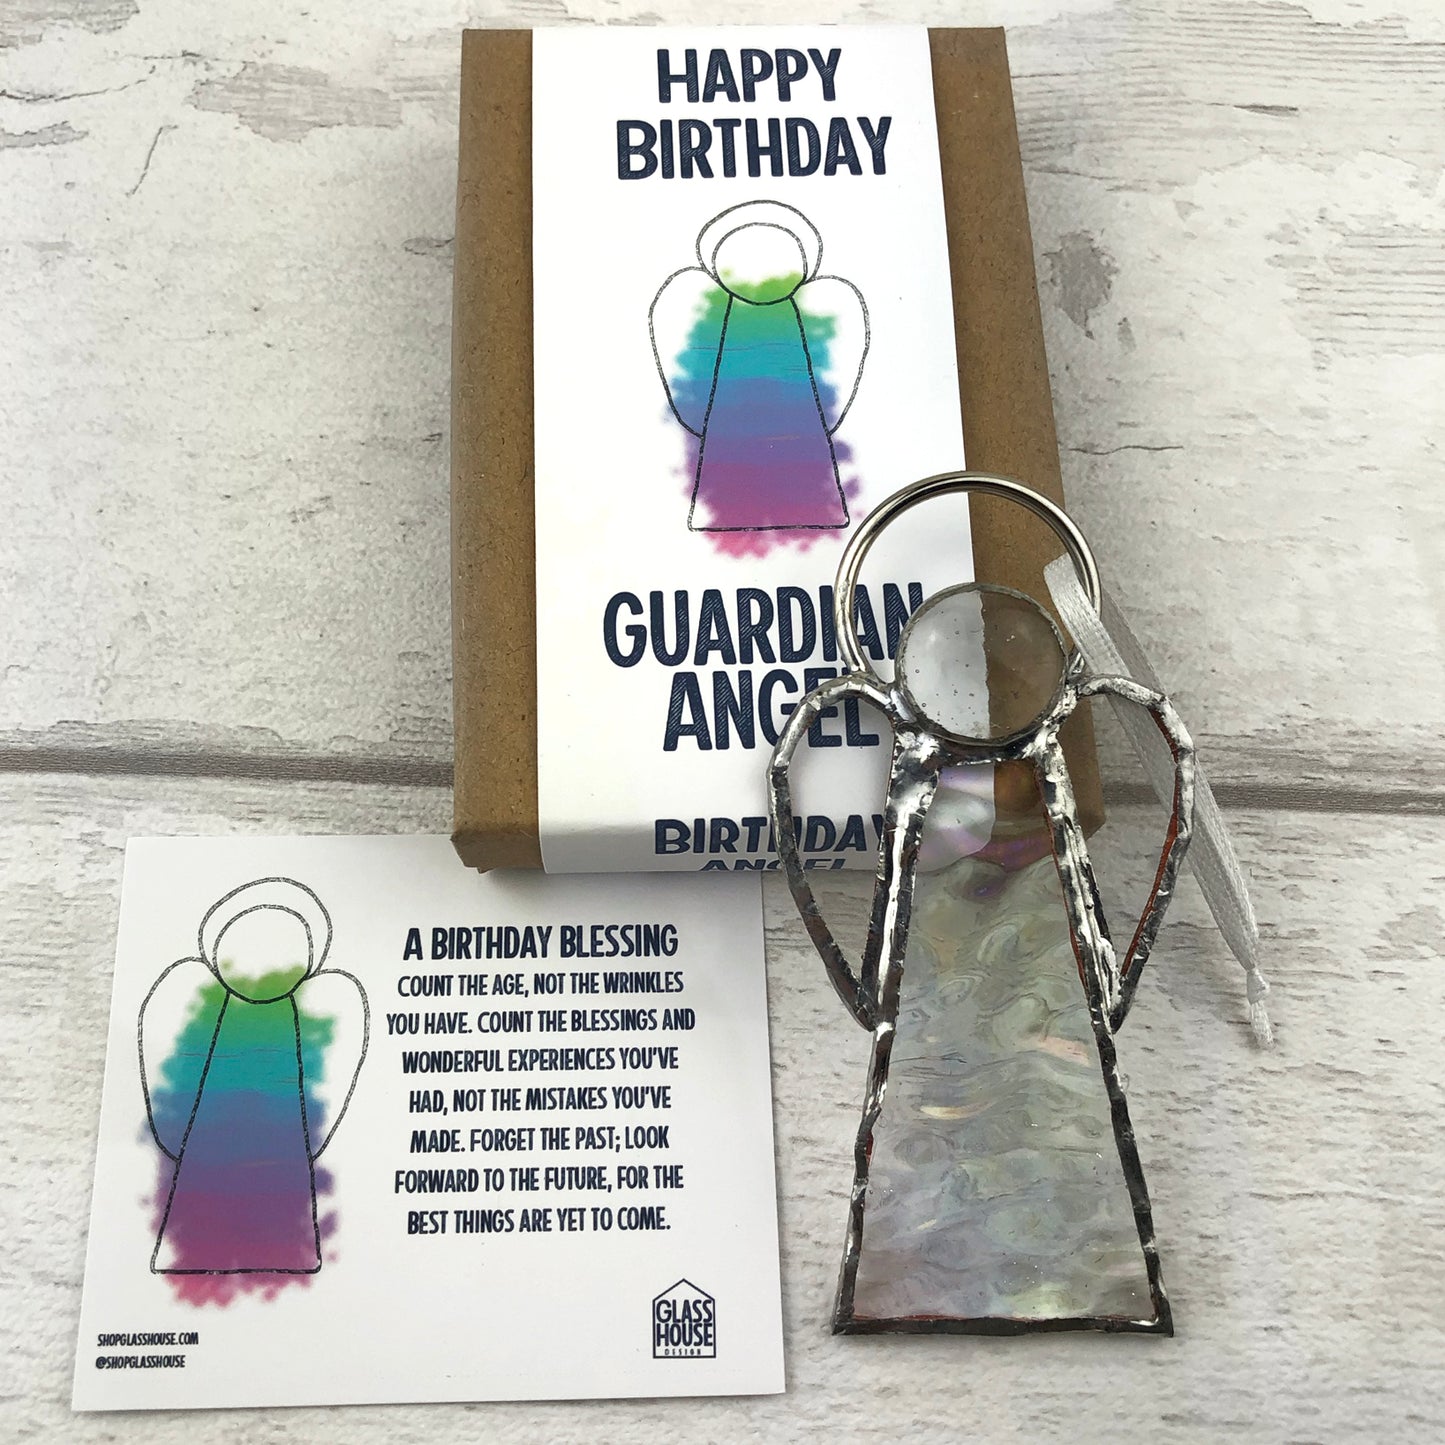 Flatlay showing clear birthday angel, birthday information card and the packaging box